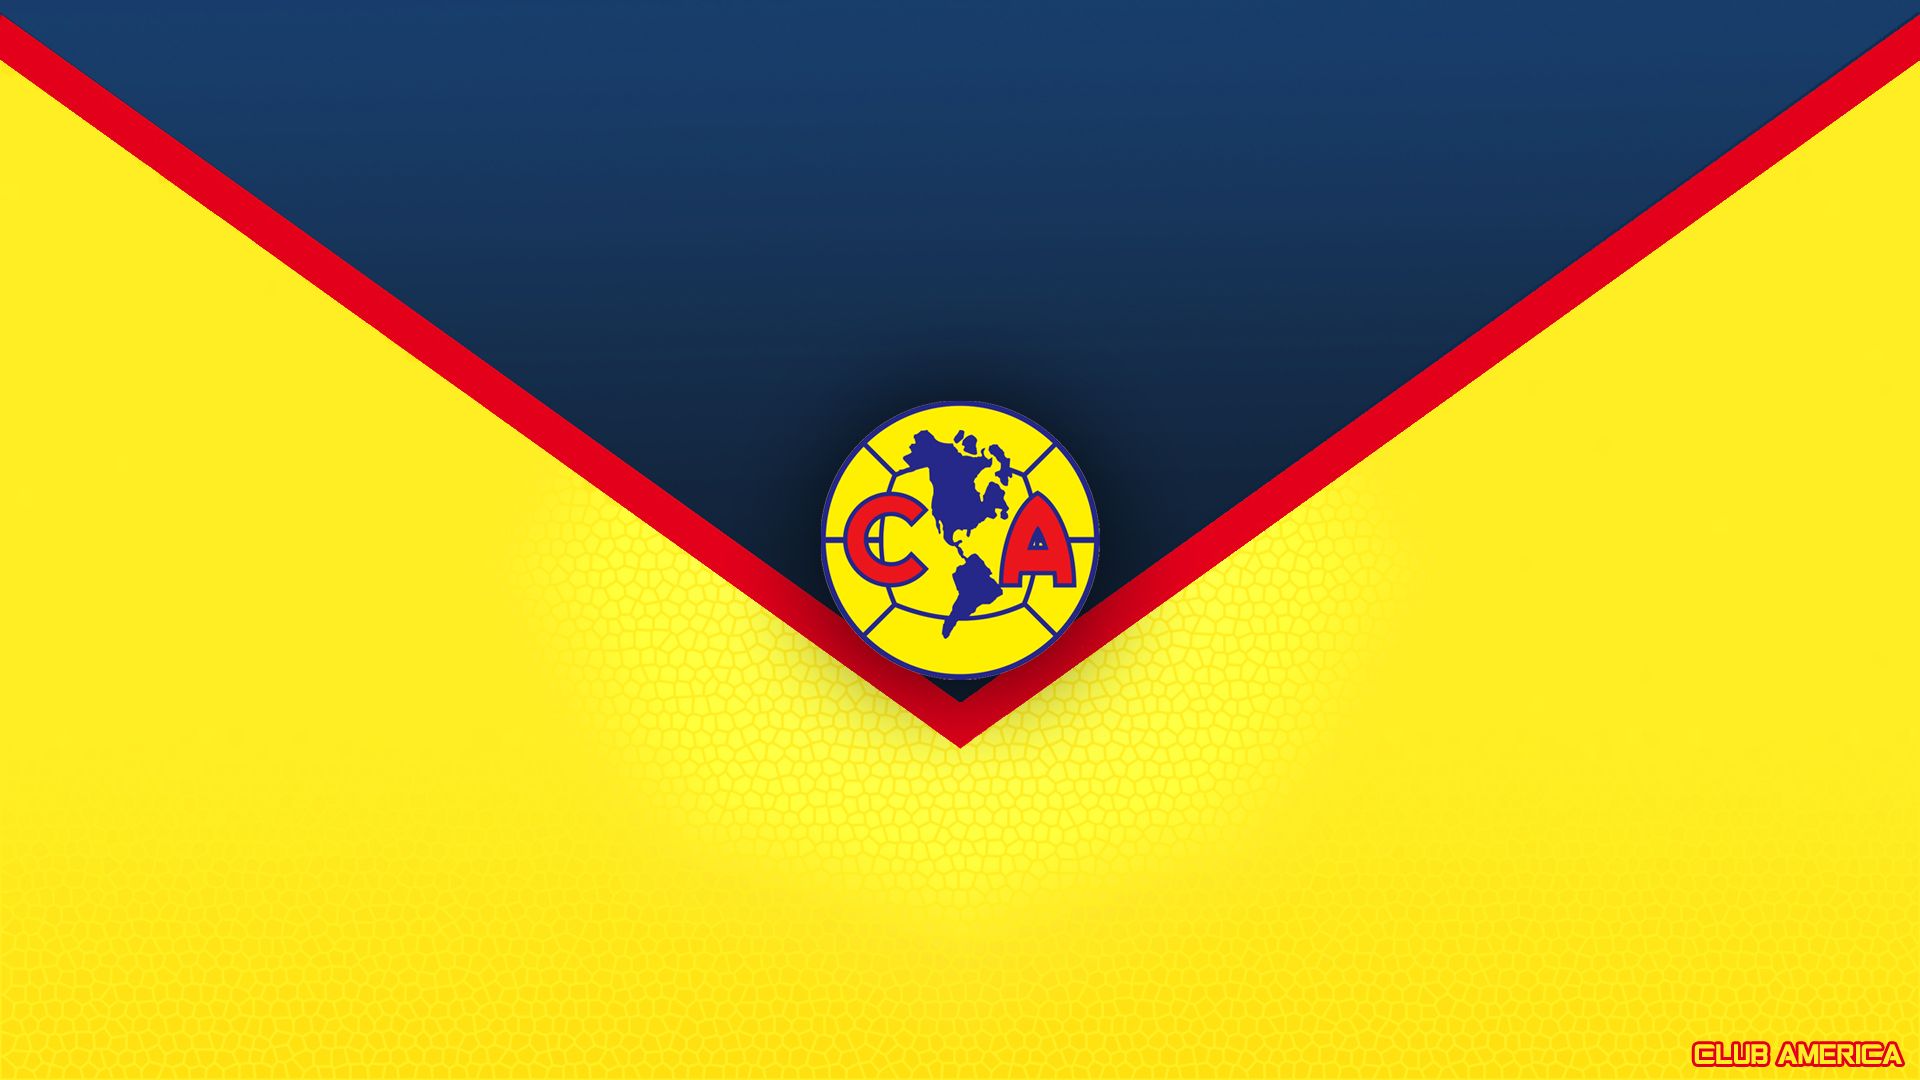 Free download Hd Wallpapers Club America 449 X 609 41 Kb Jpeg HD Wallpapers  100 1600x1241 for your Desktop Mobile  Tablet  Explore 49 Club America  HD Wallpapers  Club Wallpaper